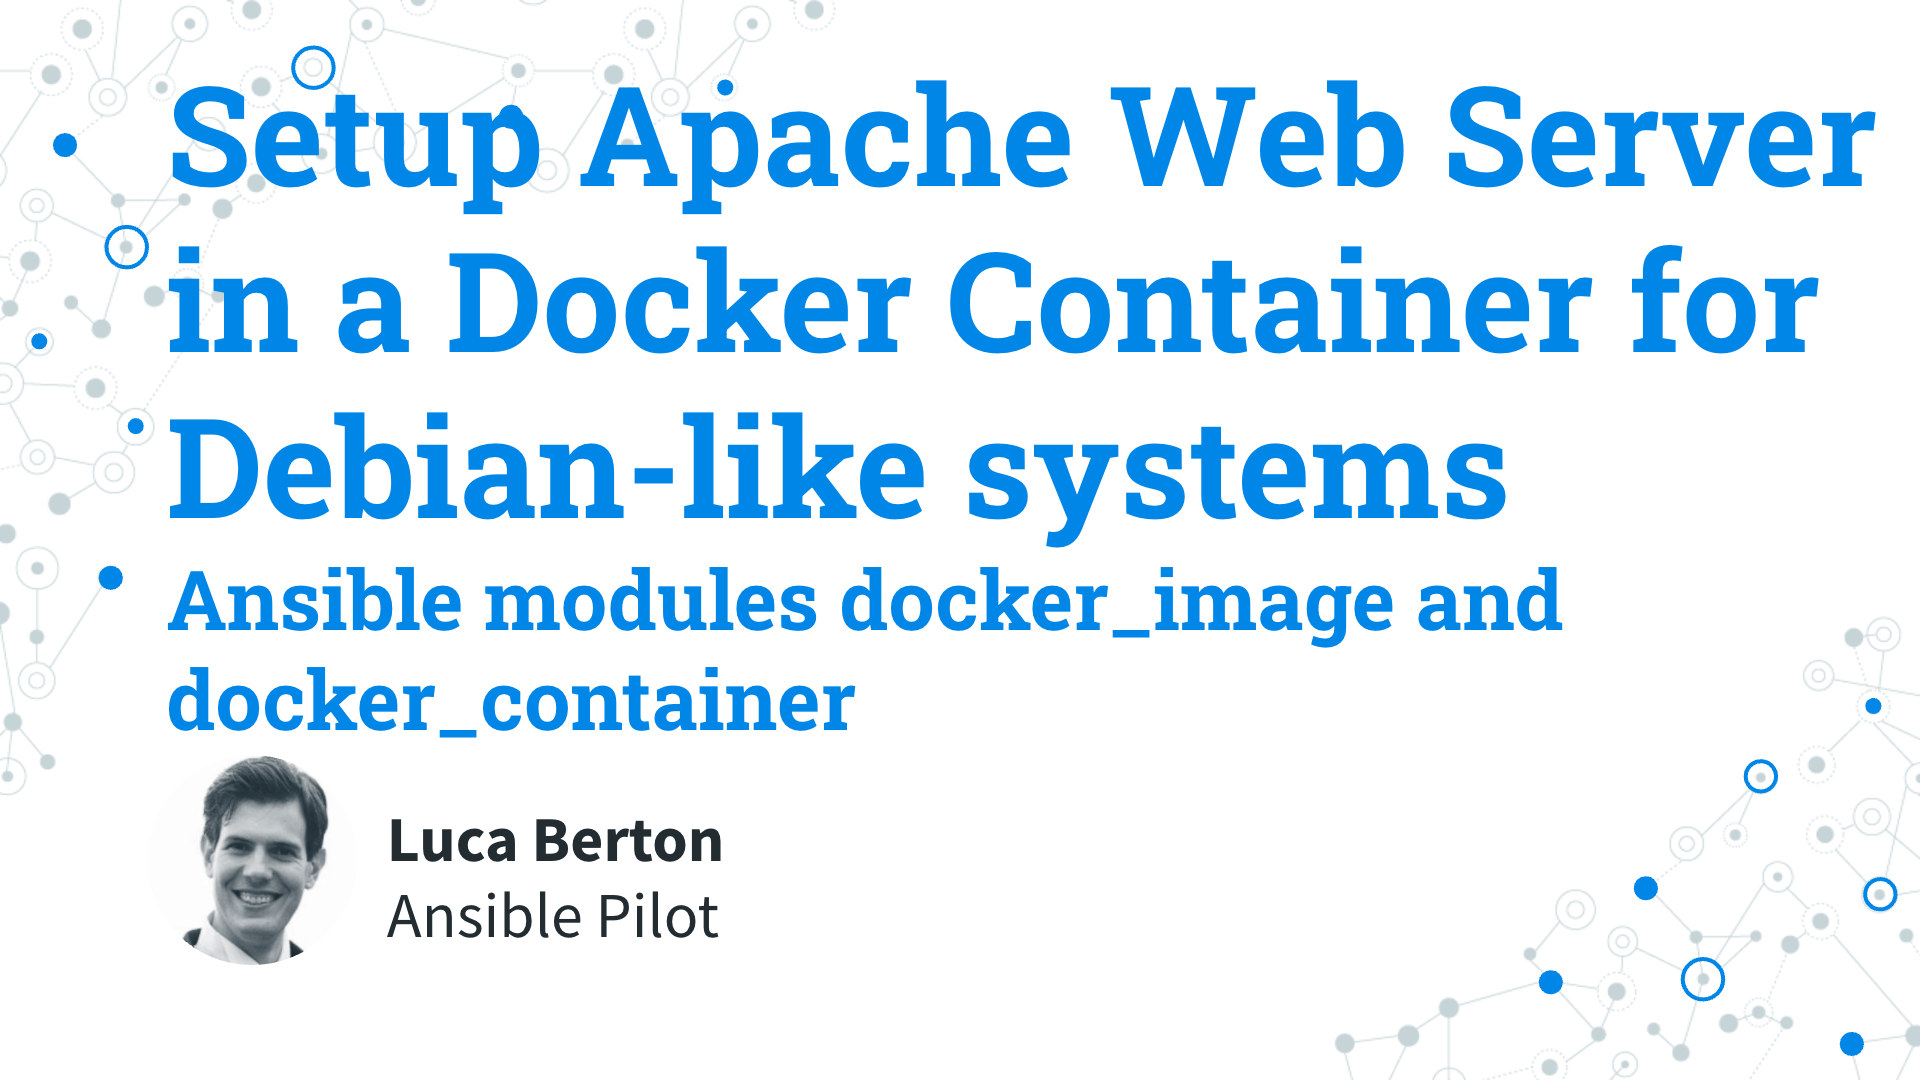 Deploy Apache Web Server in Container for Debian-like systems - Ansible modules docker_image and docker_container - Ansible Pilot